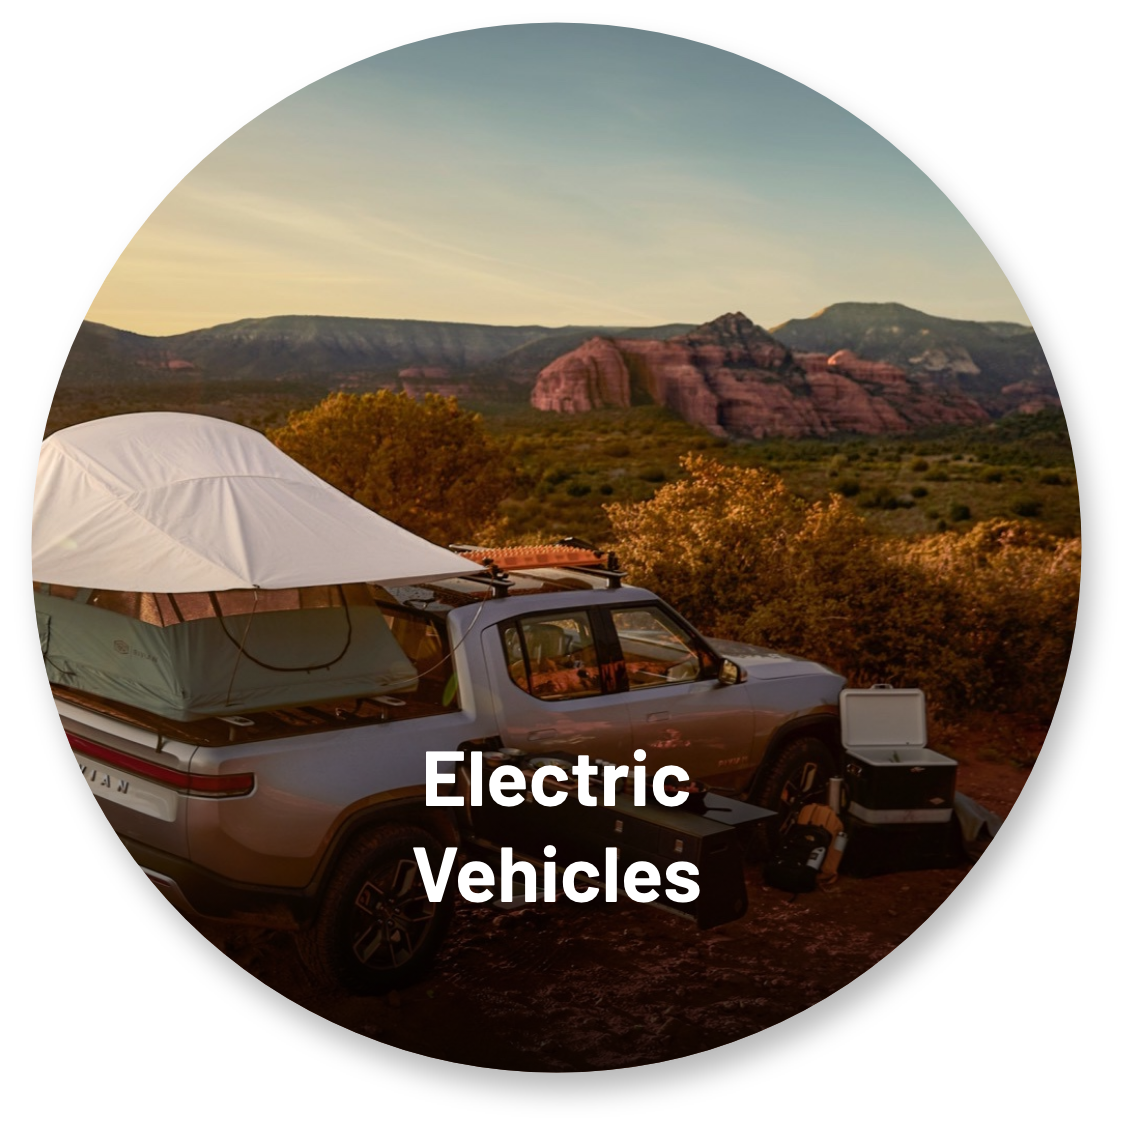 Electric Vehicles - Click to learn more.